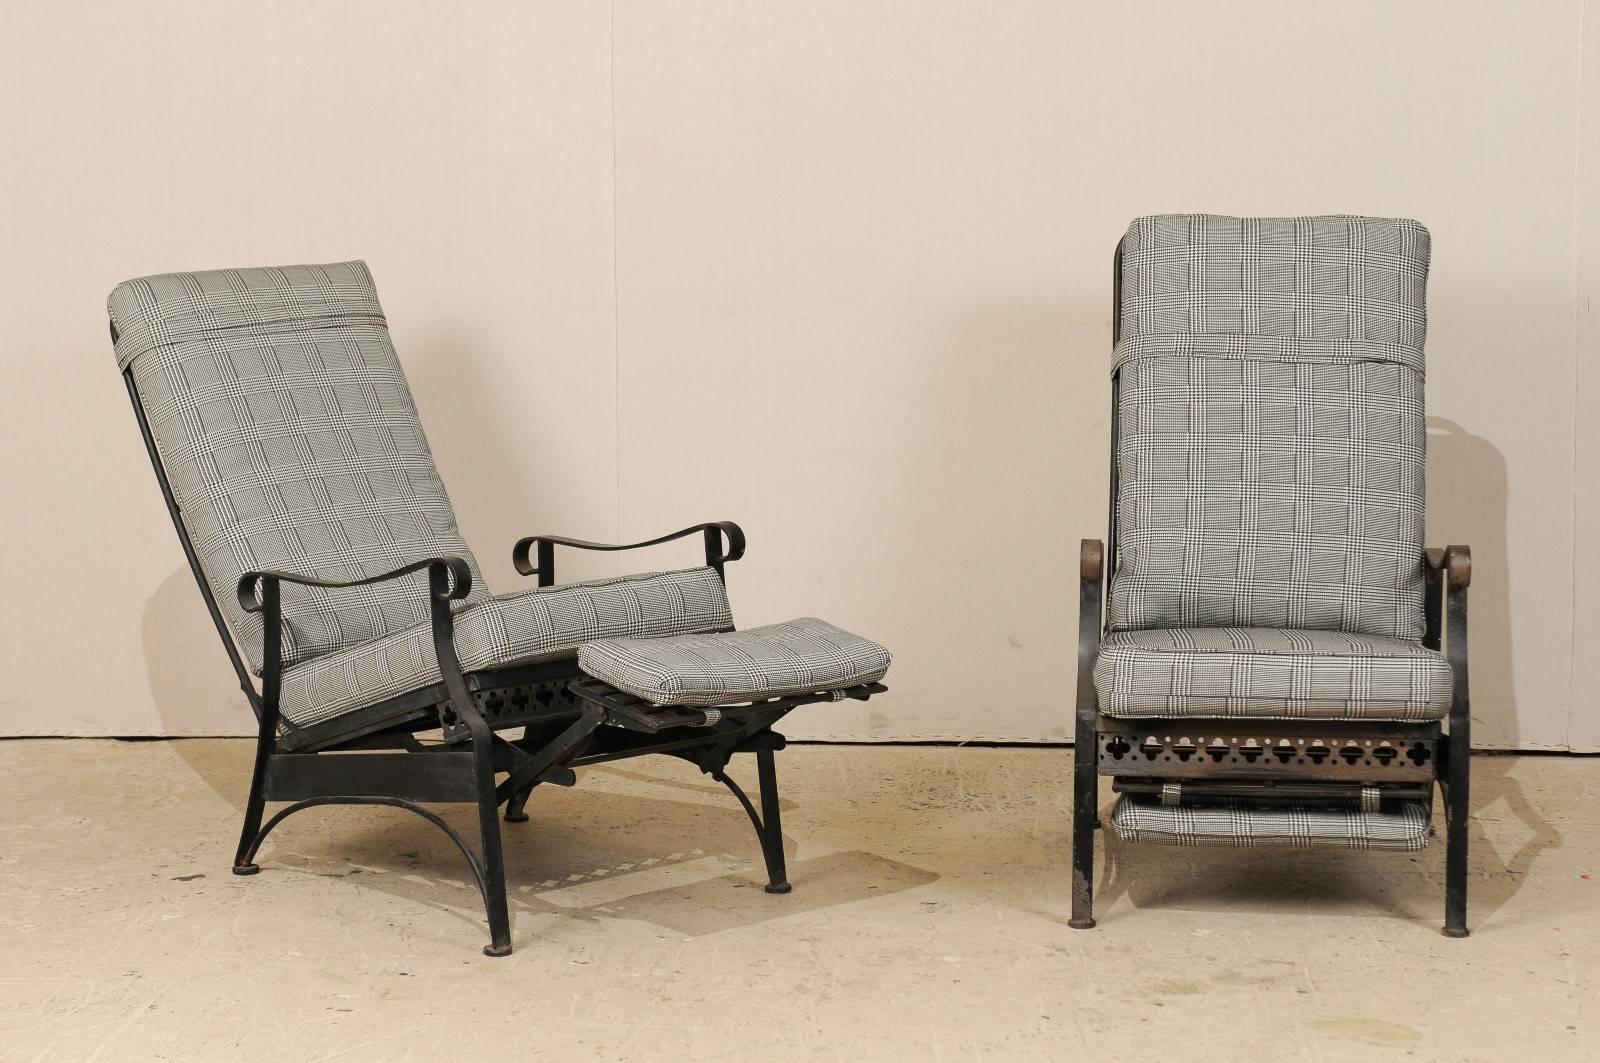 A pair of American Mid-Century reclining patio chairs. This pair of vintage iron patio chairs from the mid-20th century feature simple lines with a sweet clover and dot cut-out motif about the front seat rail. These patio chairs recline back,